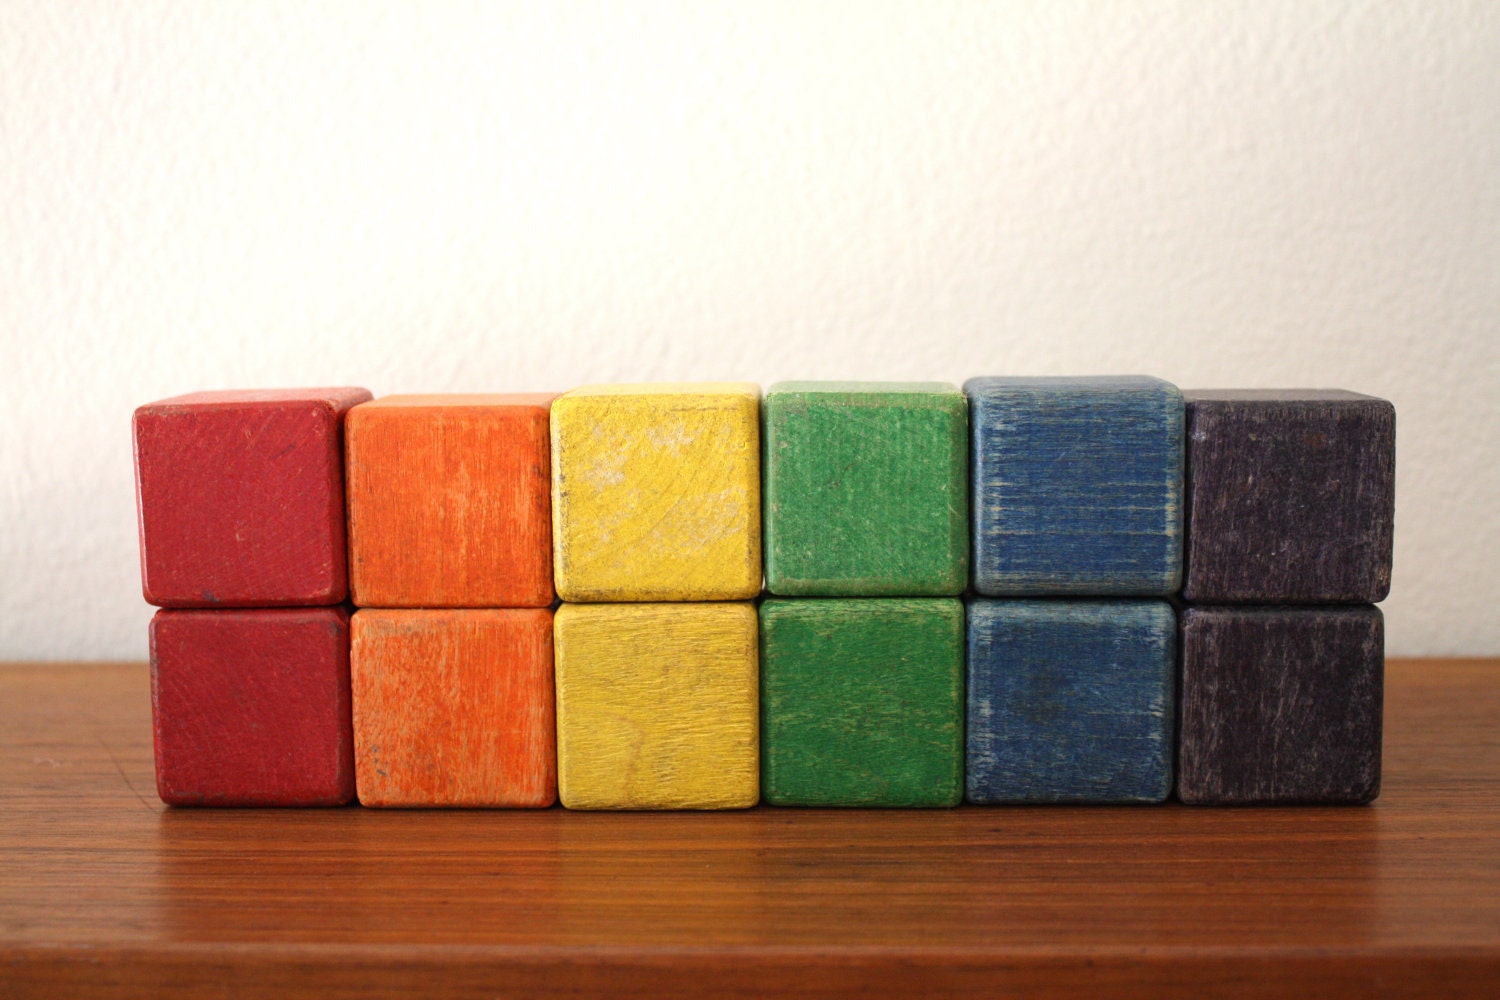 Rainbow Wooden Cube Blocks, Large 1 3/4 inches, Set of 12 - 1SweetDreamVintage